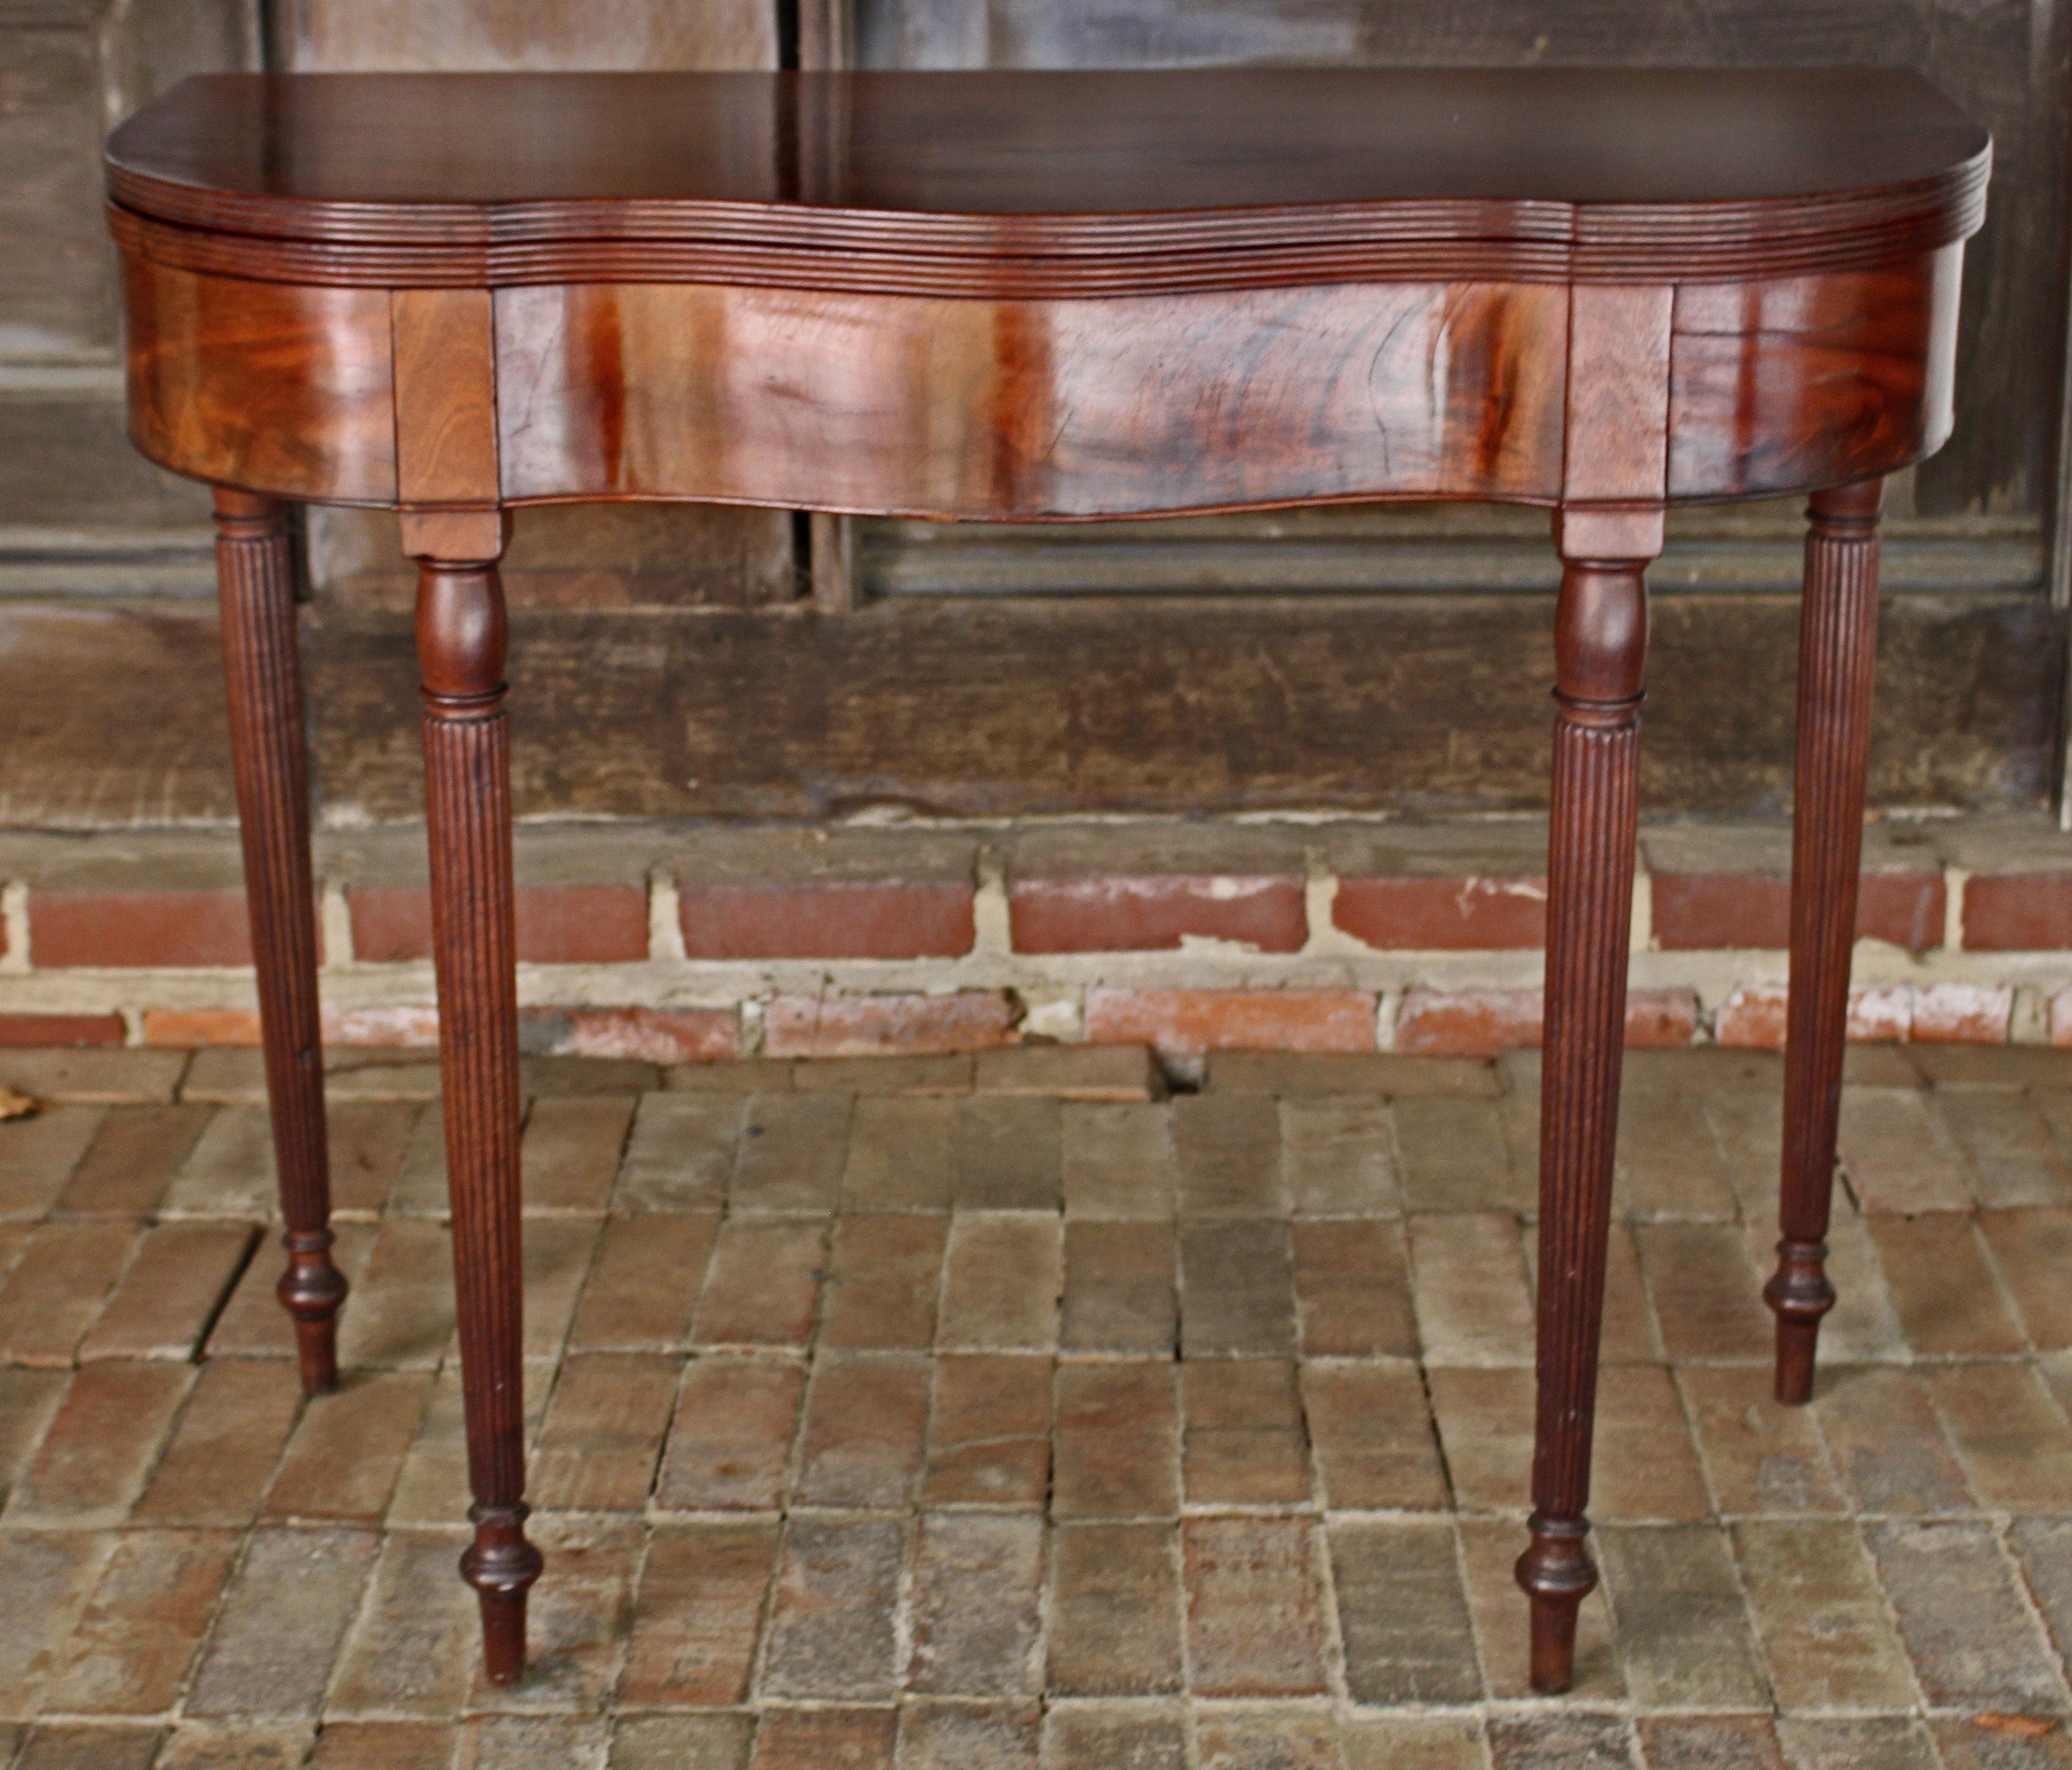 A serpentine form tea table, American, Federal period, early 19th century, New York or New England. Well figured mahogany, particularly on the serpentine fronts. Raised on tapered, reeded legs with vasi-form details. Early, quality stacked block